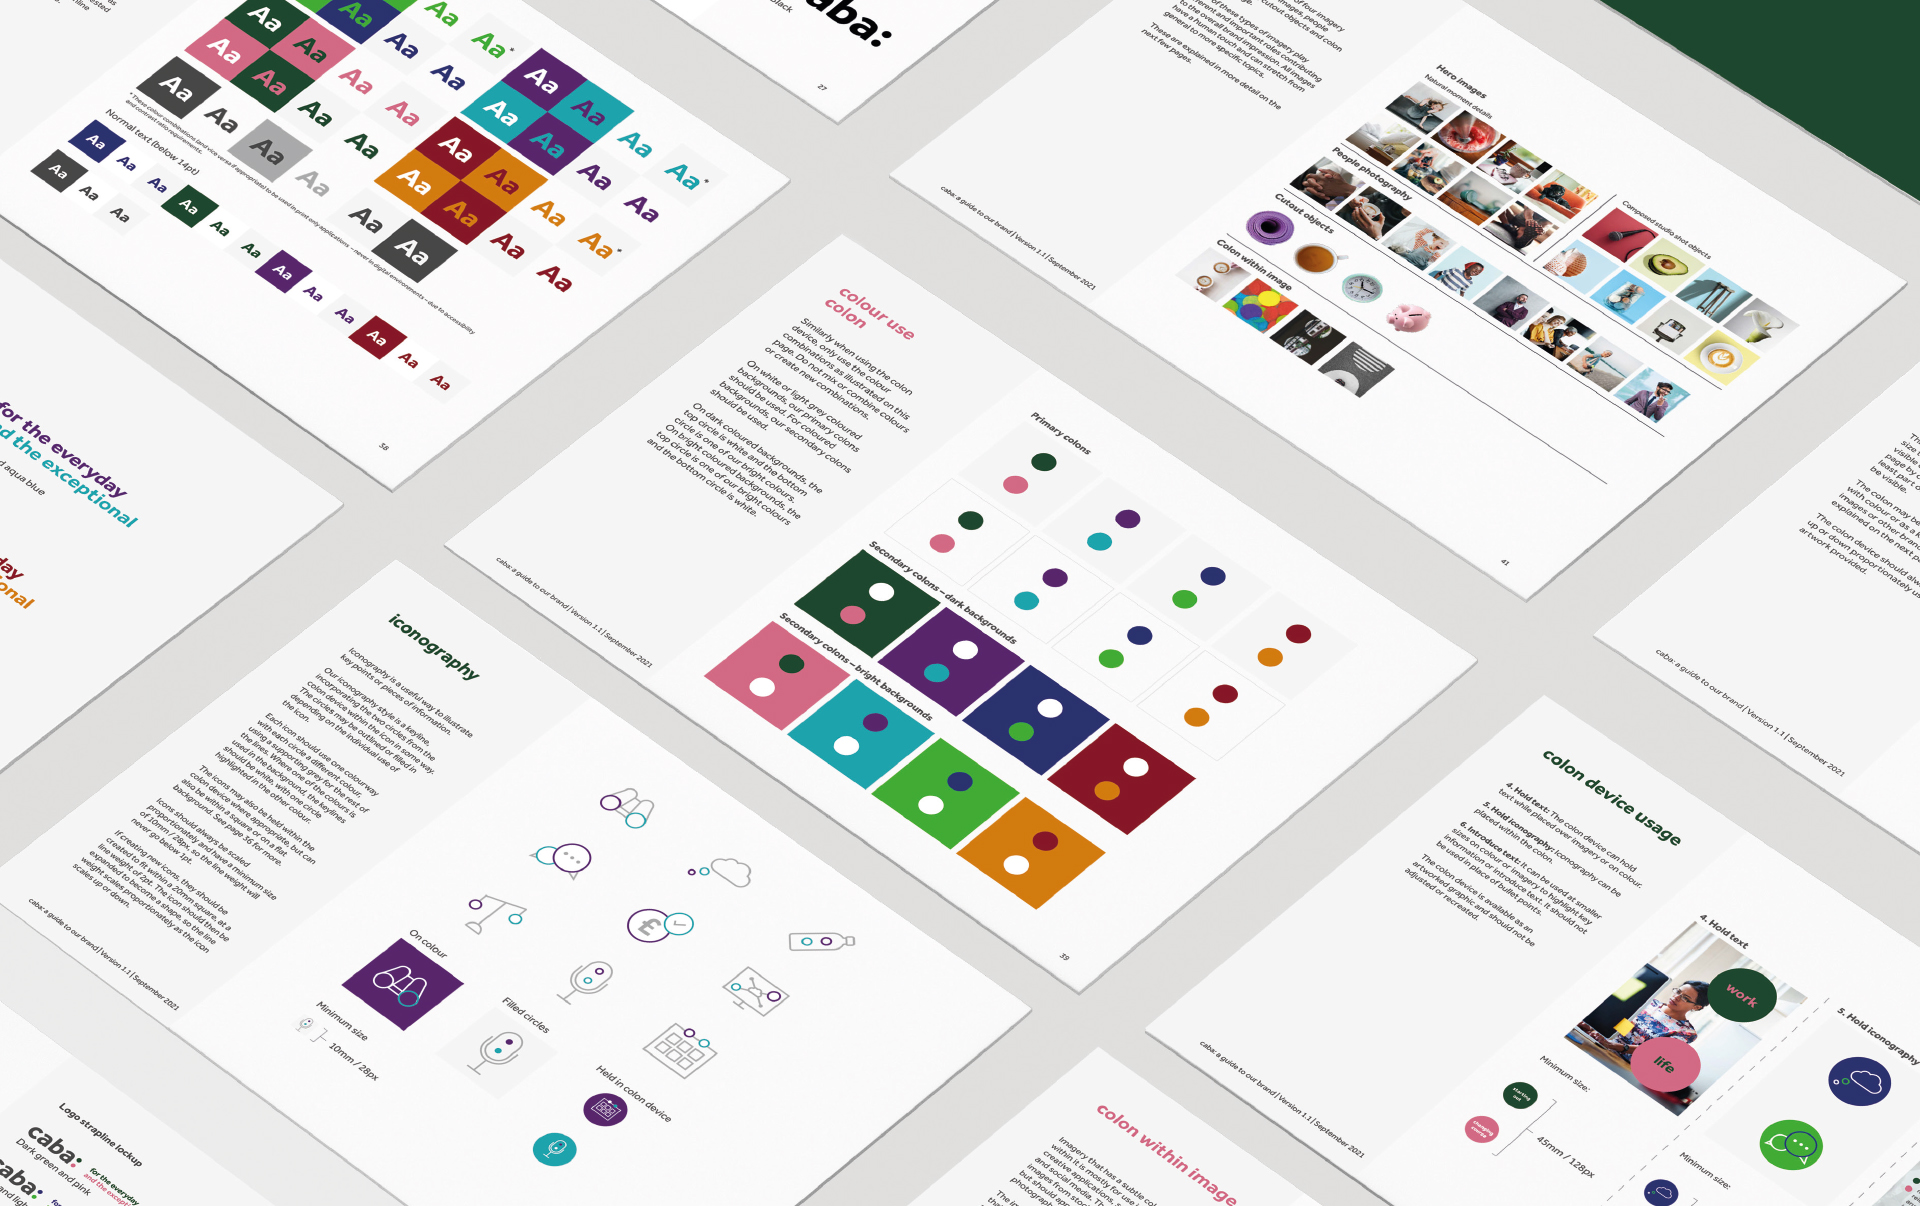 caba brand guidelines image